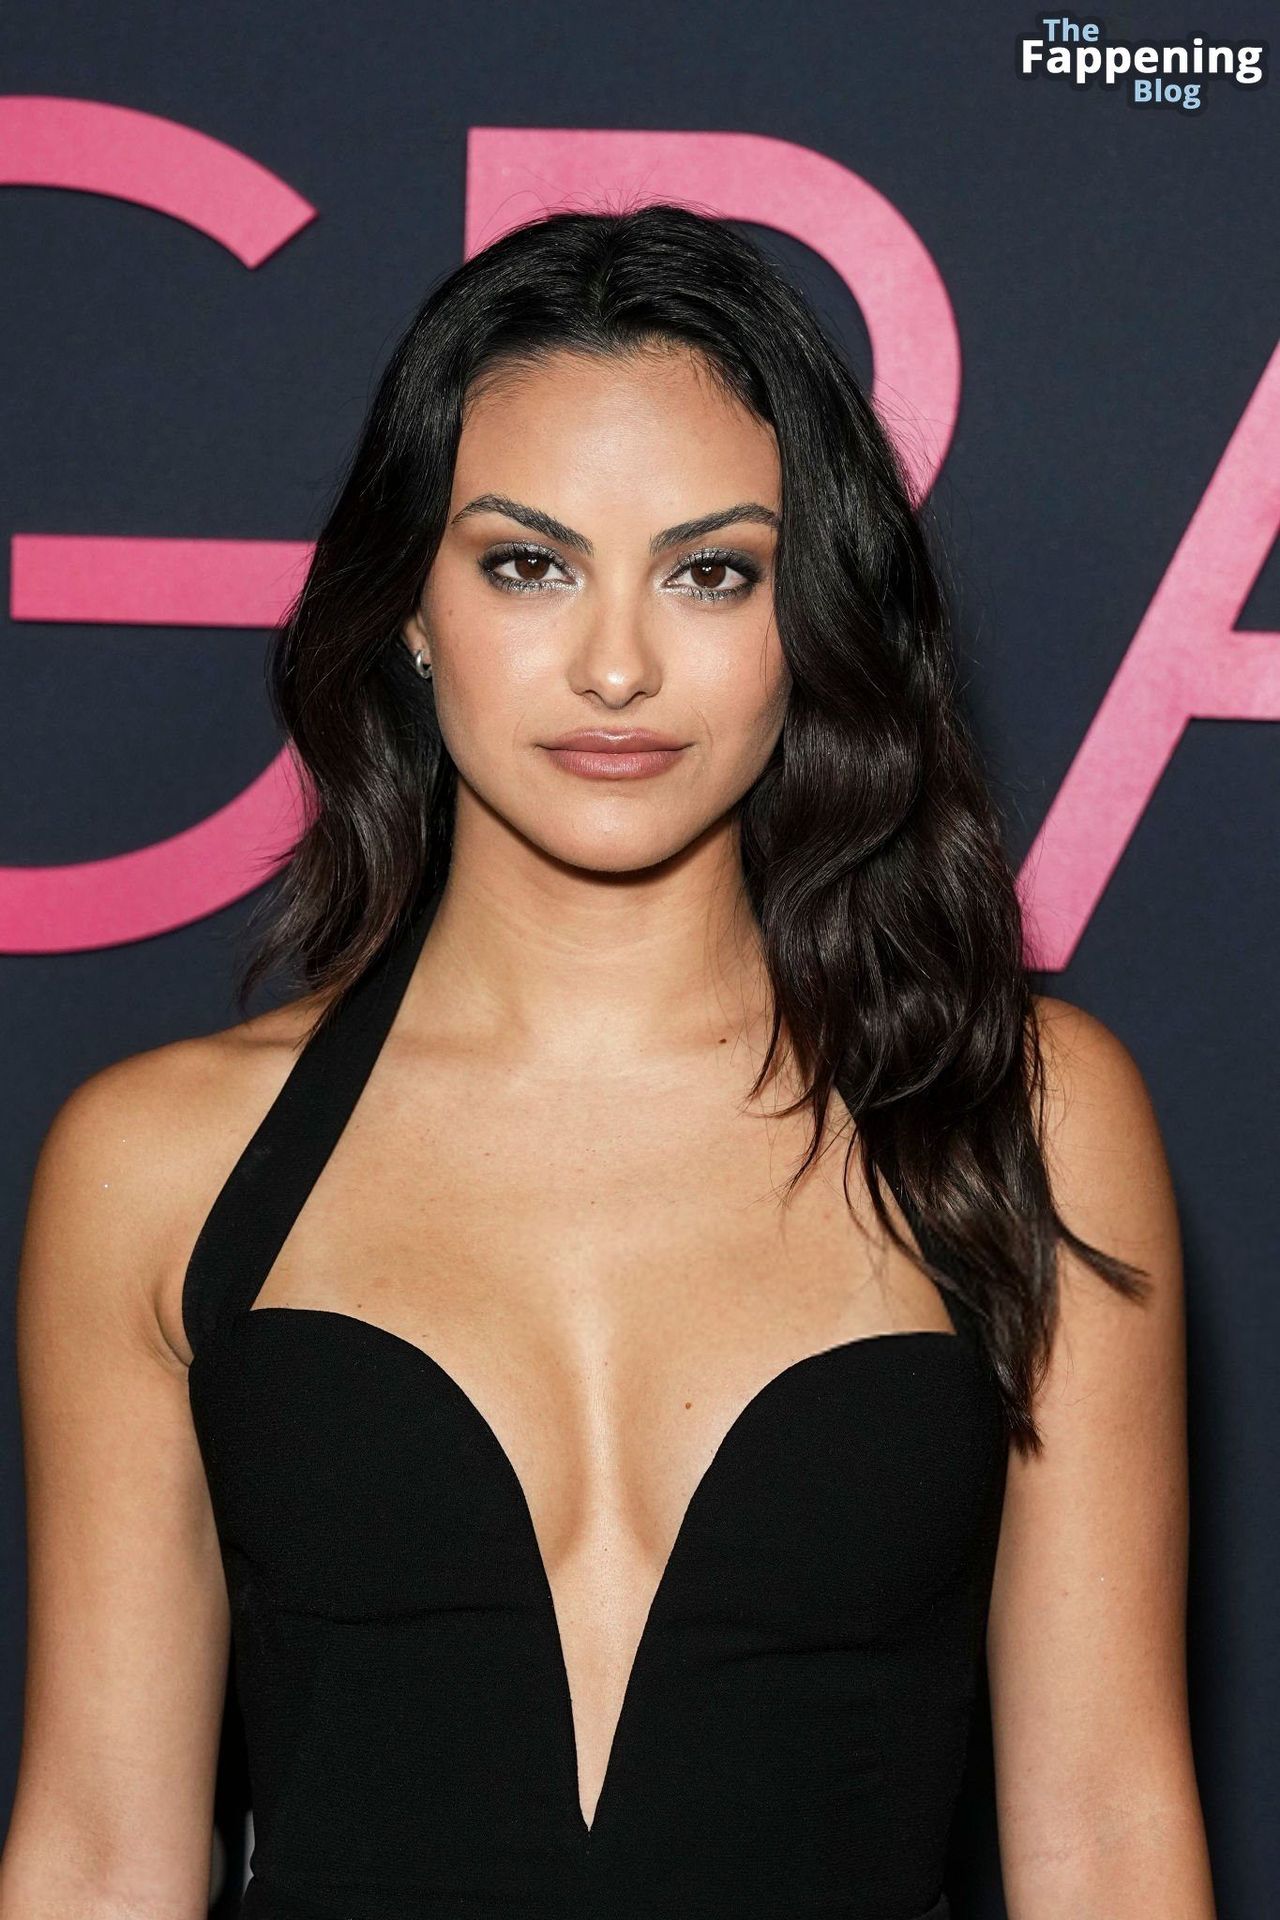 camila-mendes-upgraded-screening-cleavage-low-cut-dress-2-thefappeningblog.com_.jpg